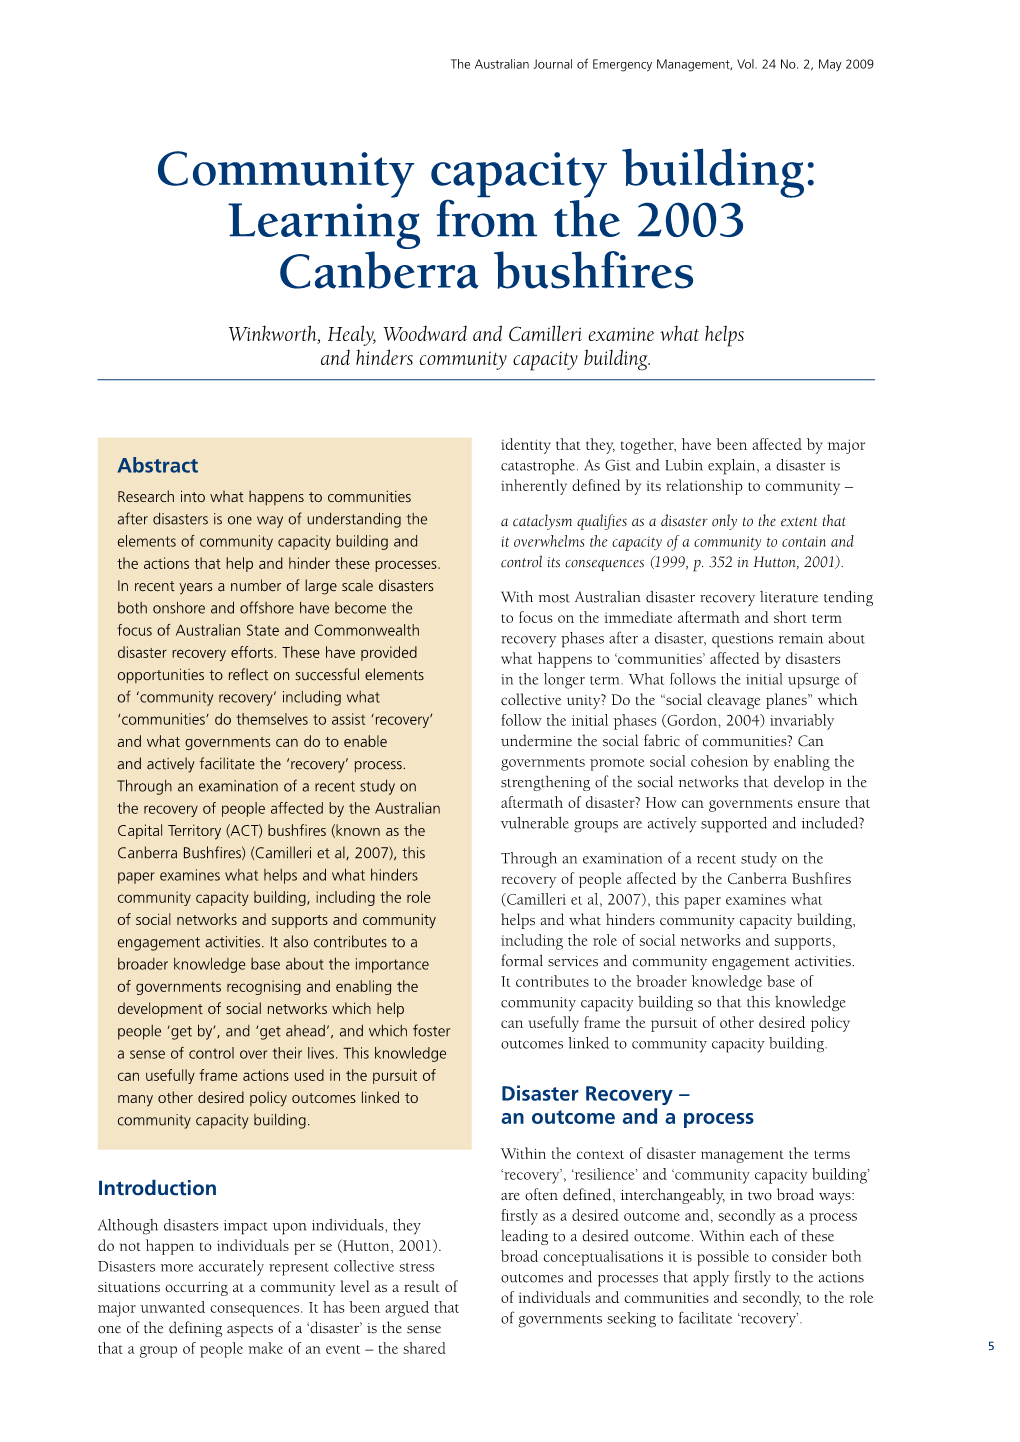 Community Capacity Building: Learning from the 2003 Canberra Bushfires